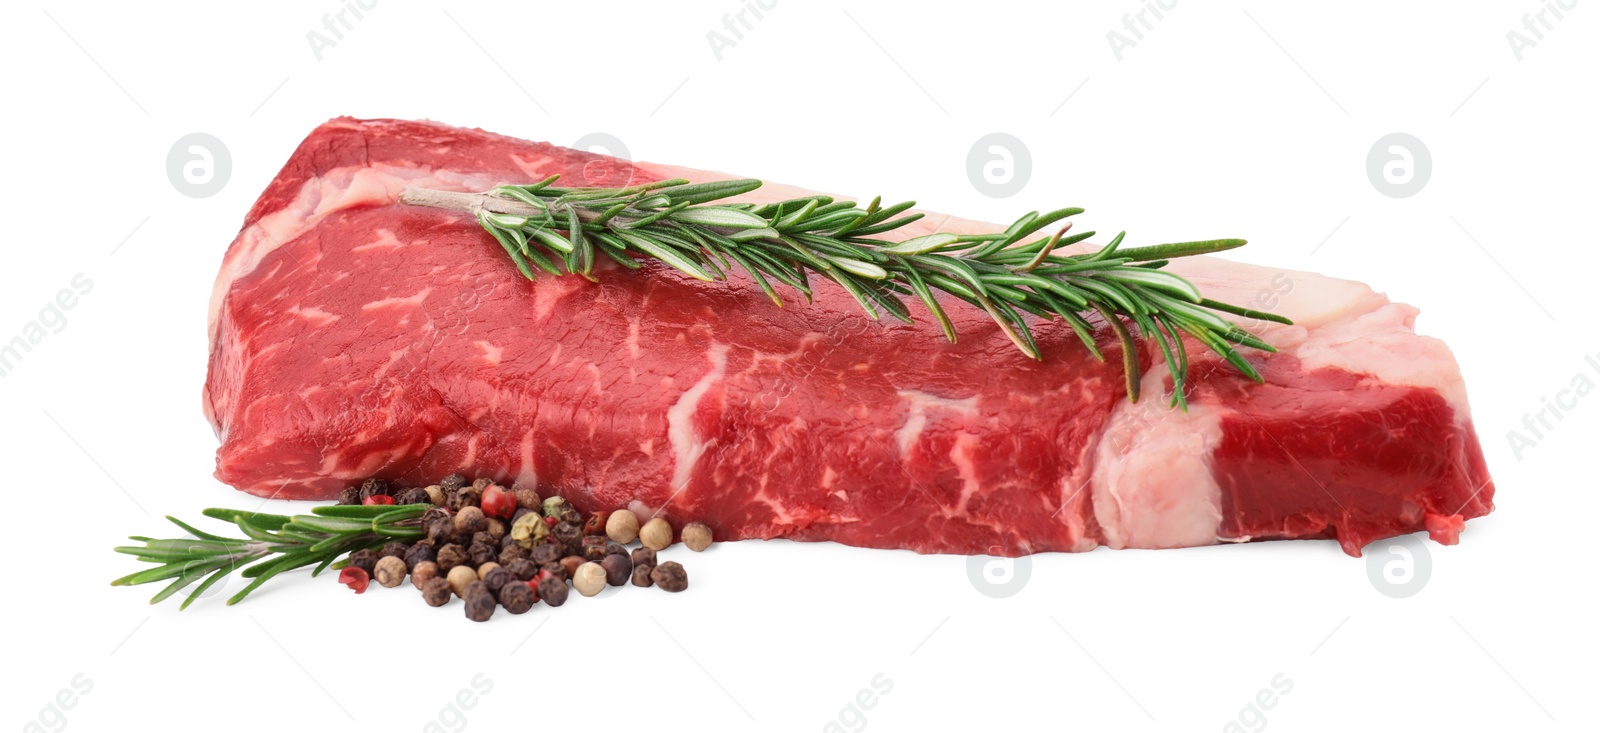 Photo of Piece of raw beef meat, rosemary and spices isolated on white